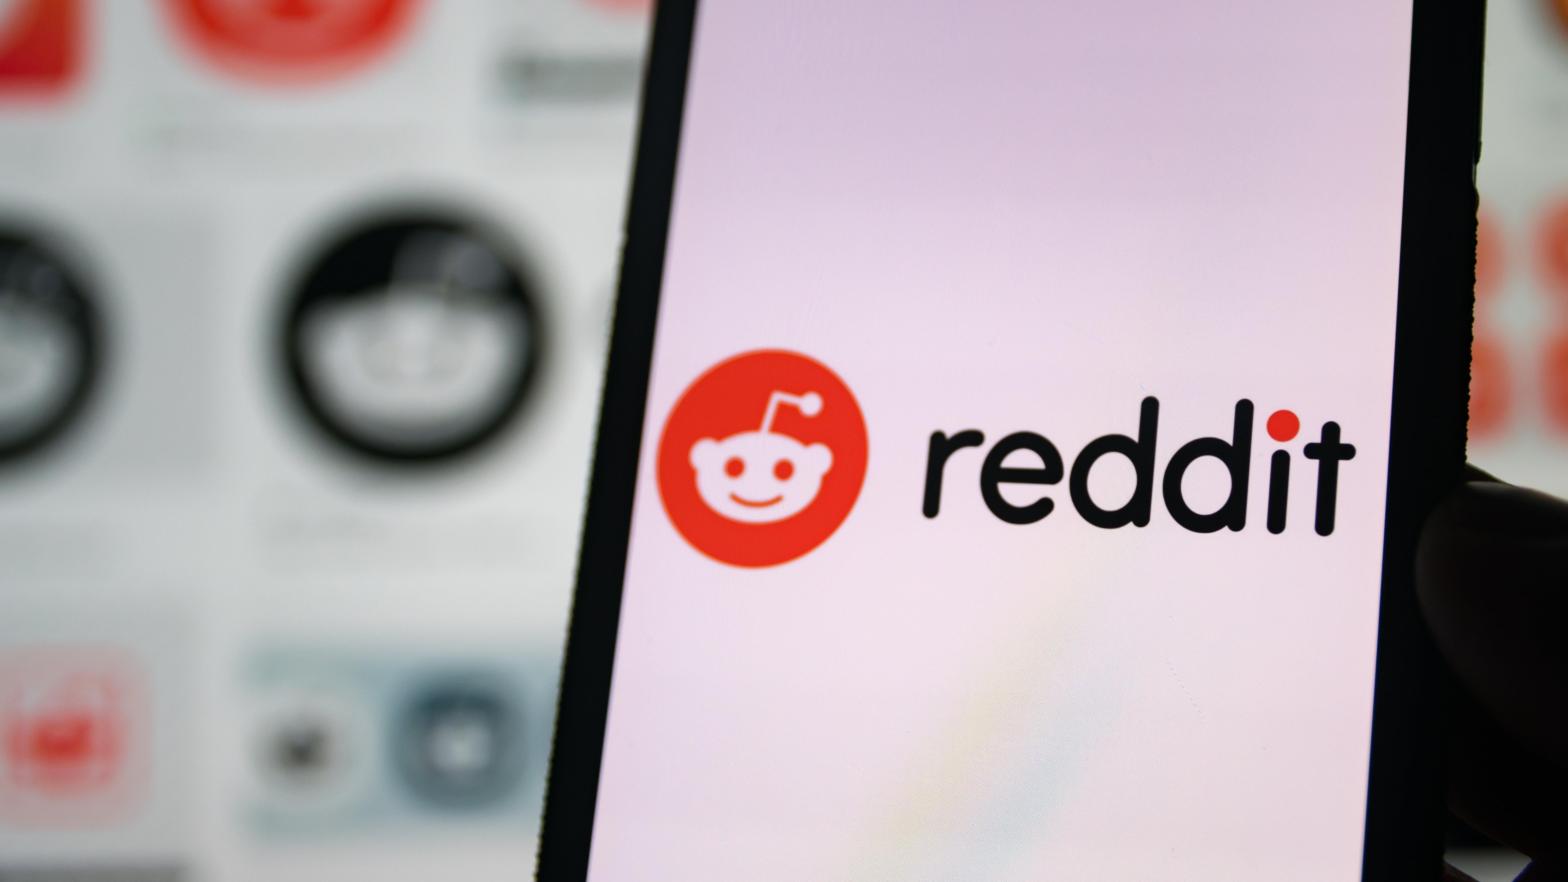 Reddit has banned far more users than last year after it started enforcing restrictions on non-consensual material like revenge porn or voyeurism. (Photo: Camilo Concha, Shutterstock)